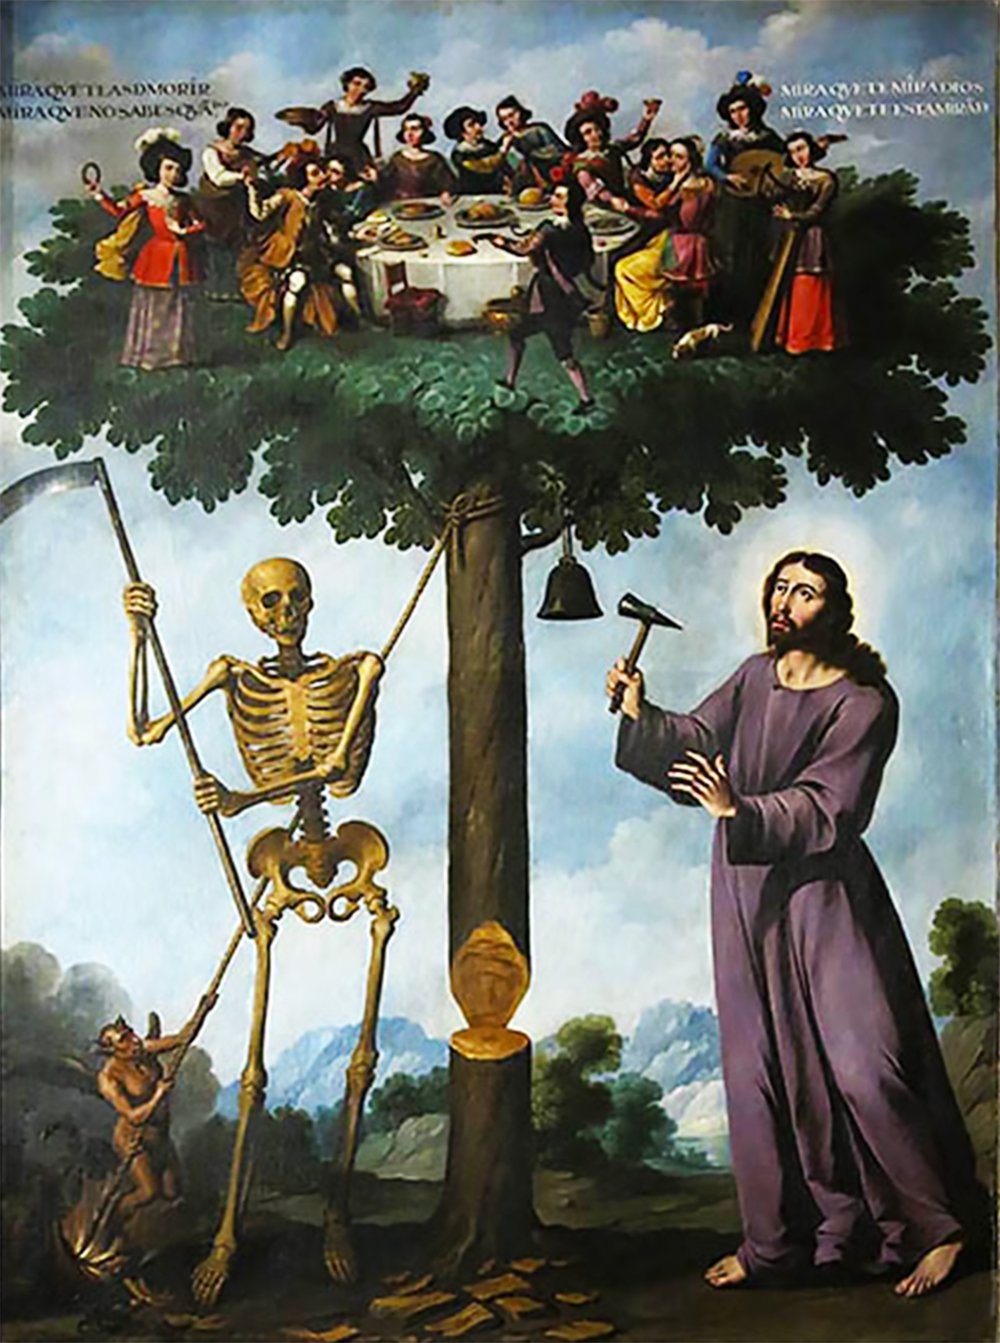 The artwork depicts The Tree of Life with Jesus Christ on the right and a skeleton symbolizing death on the left.